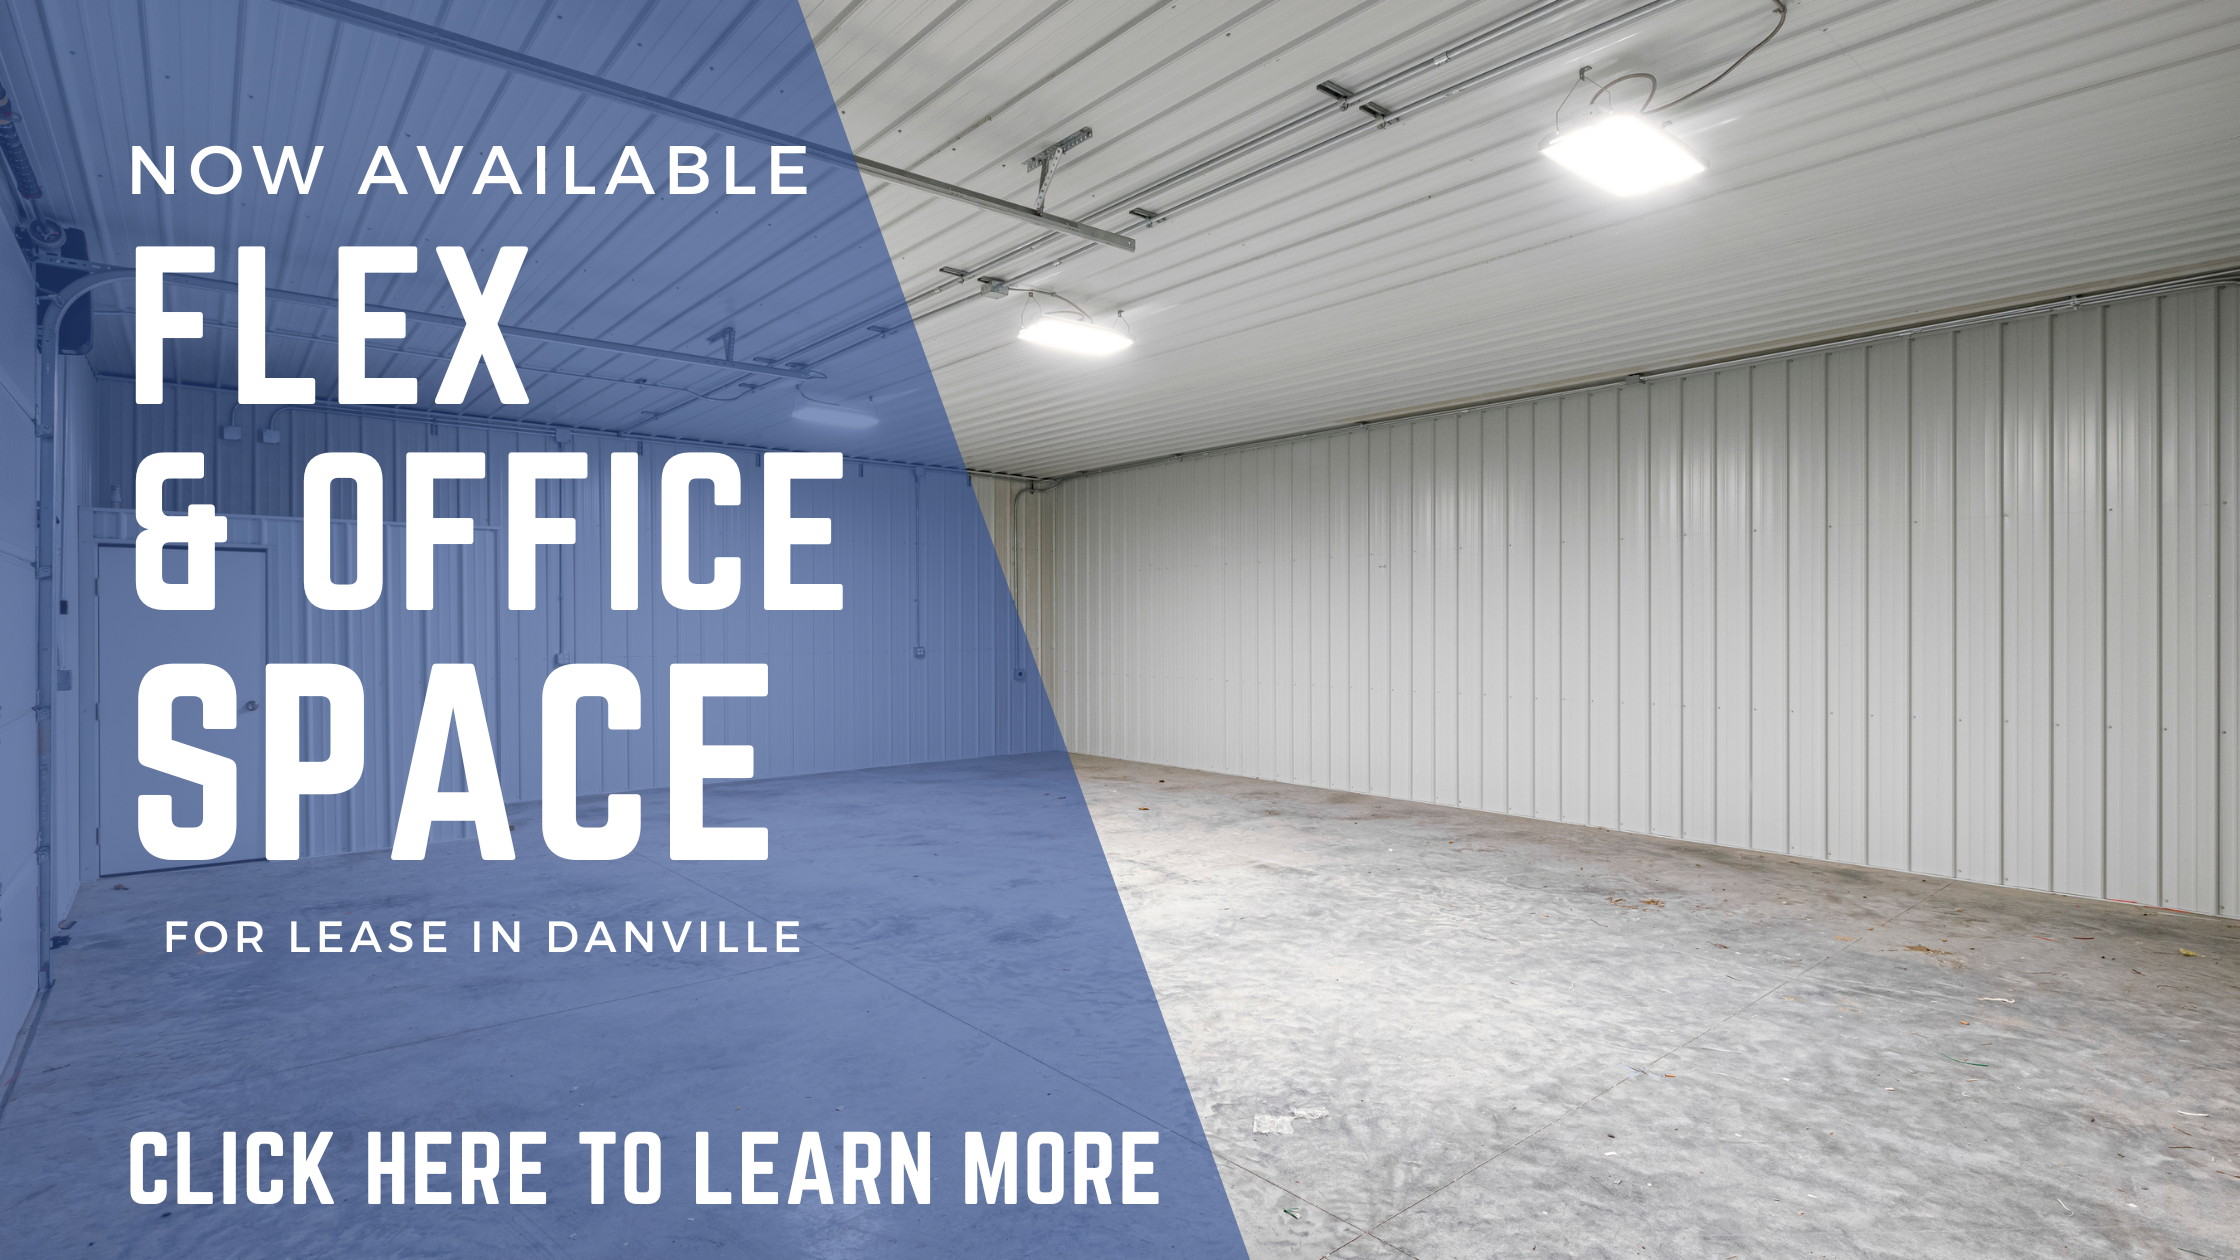 Flex space available in Danville Indiana